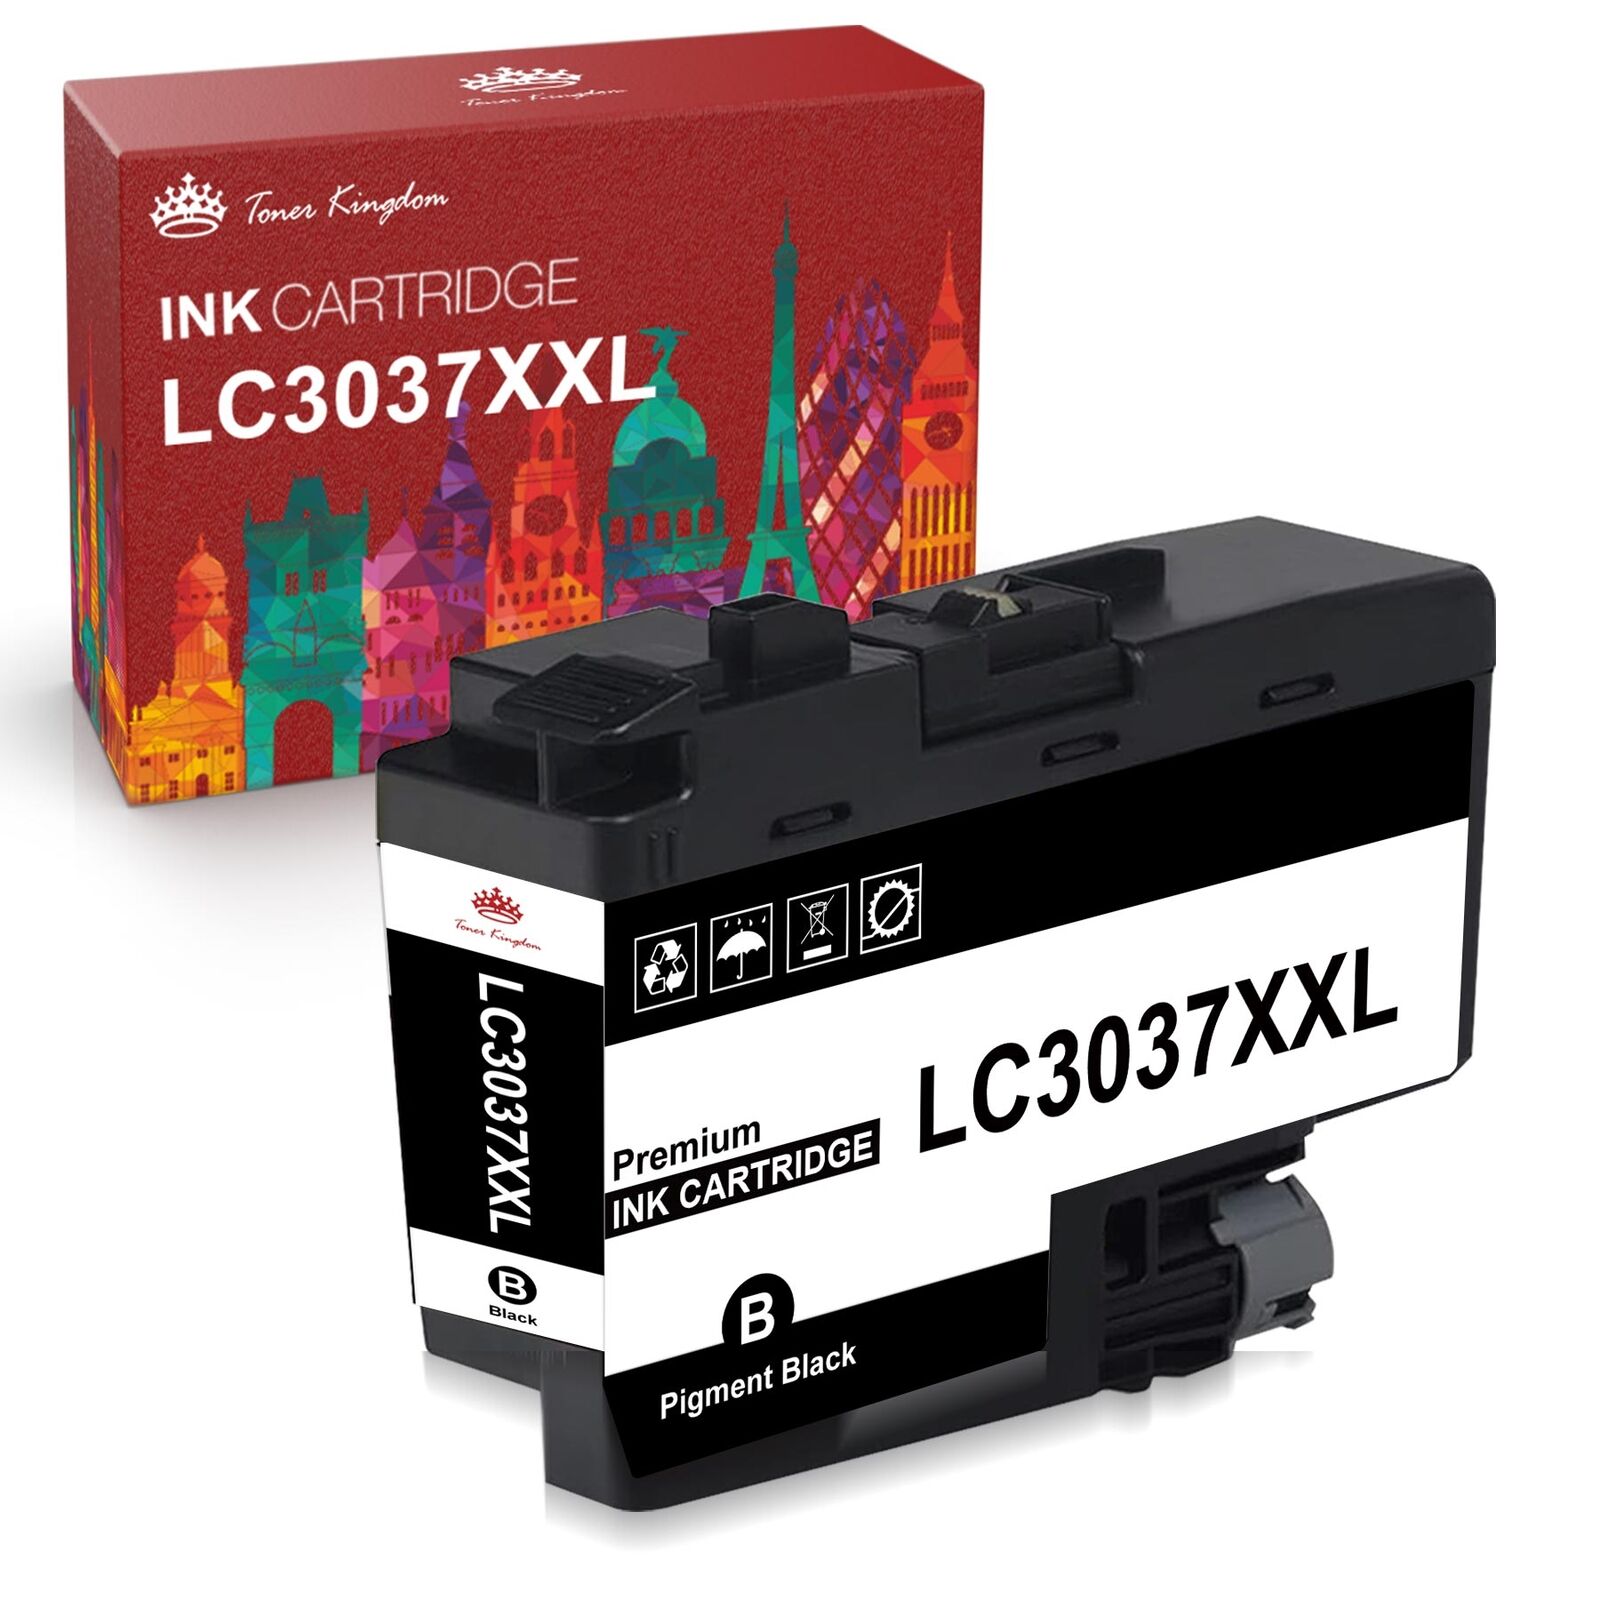 1x Compatible LC3037 Ink Cartridge Replacement for Brother LC3037XXL MFC-J6945DW